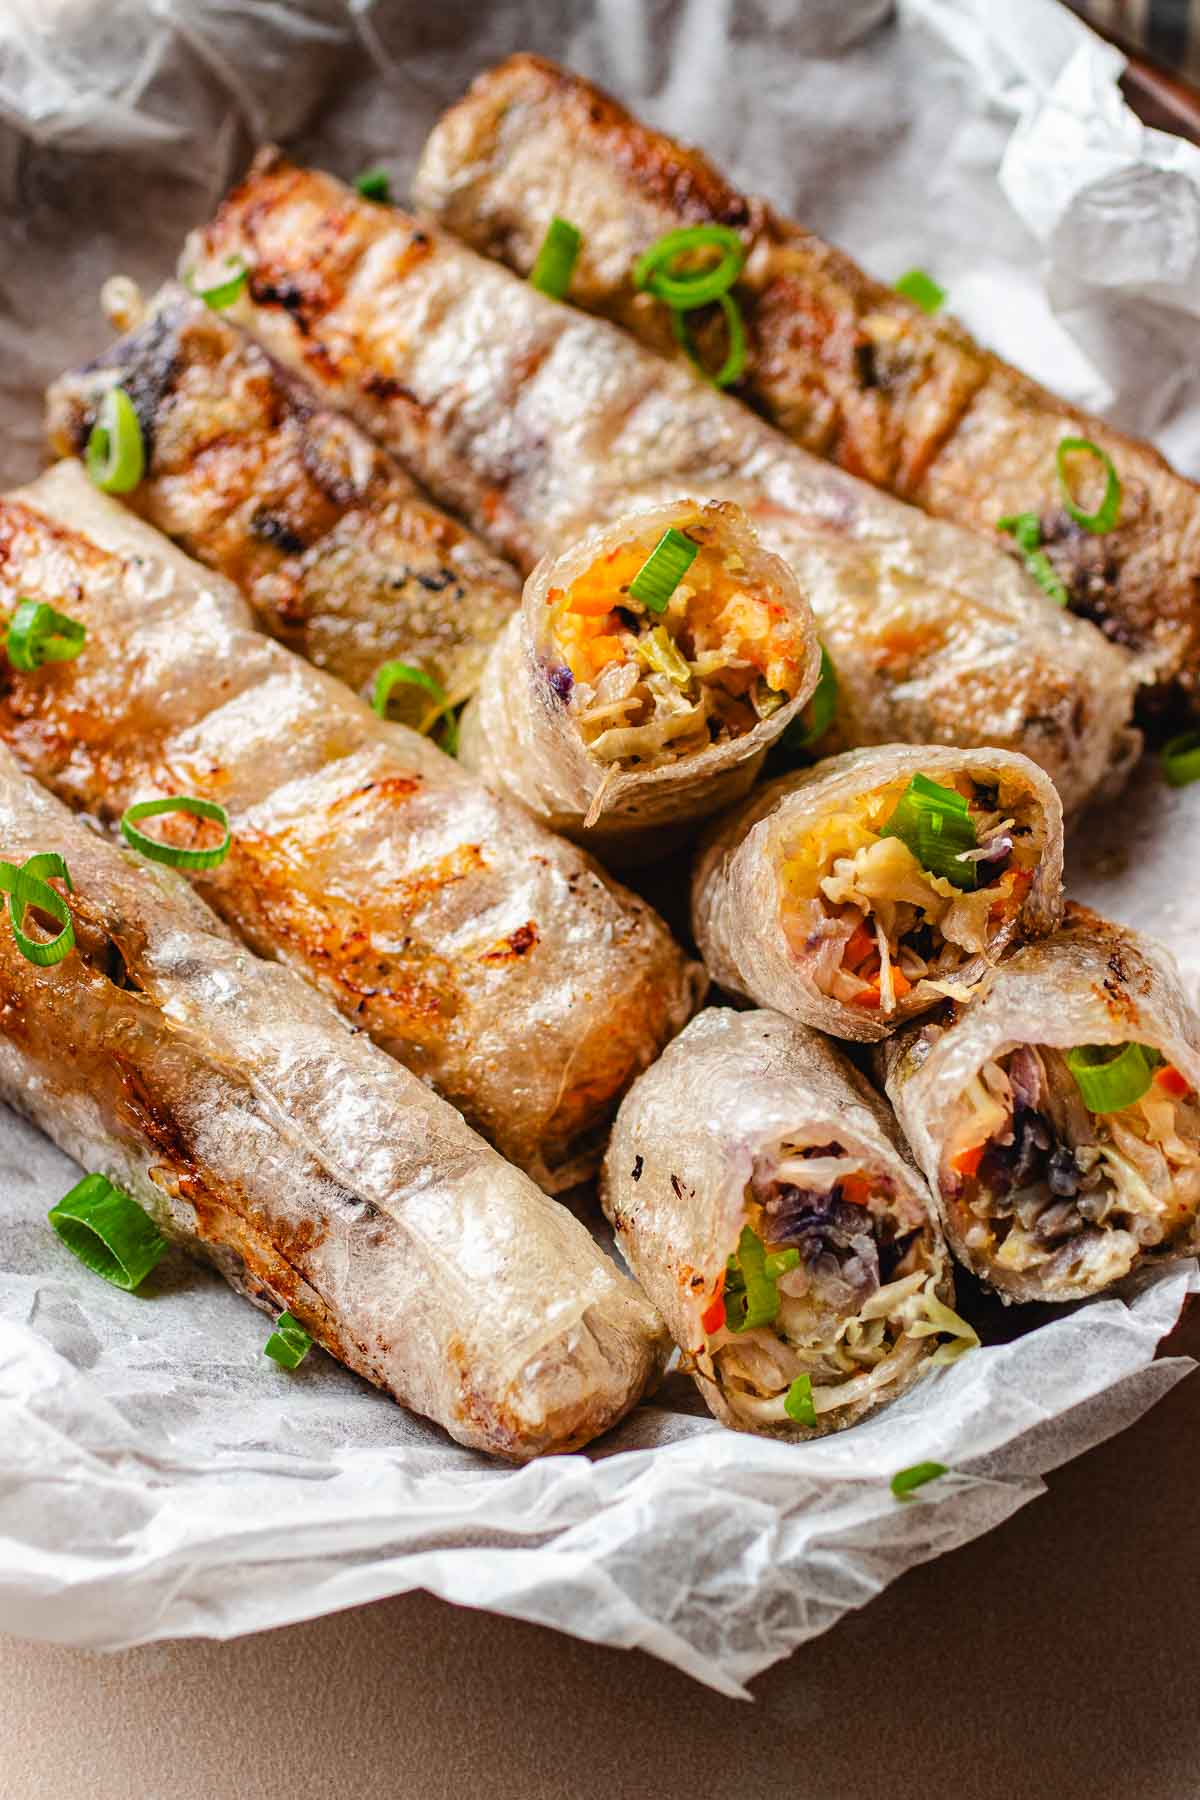 Rice paper egg rolls with vegetables inside and fried to crispy.